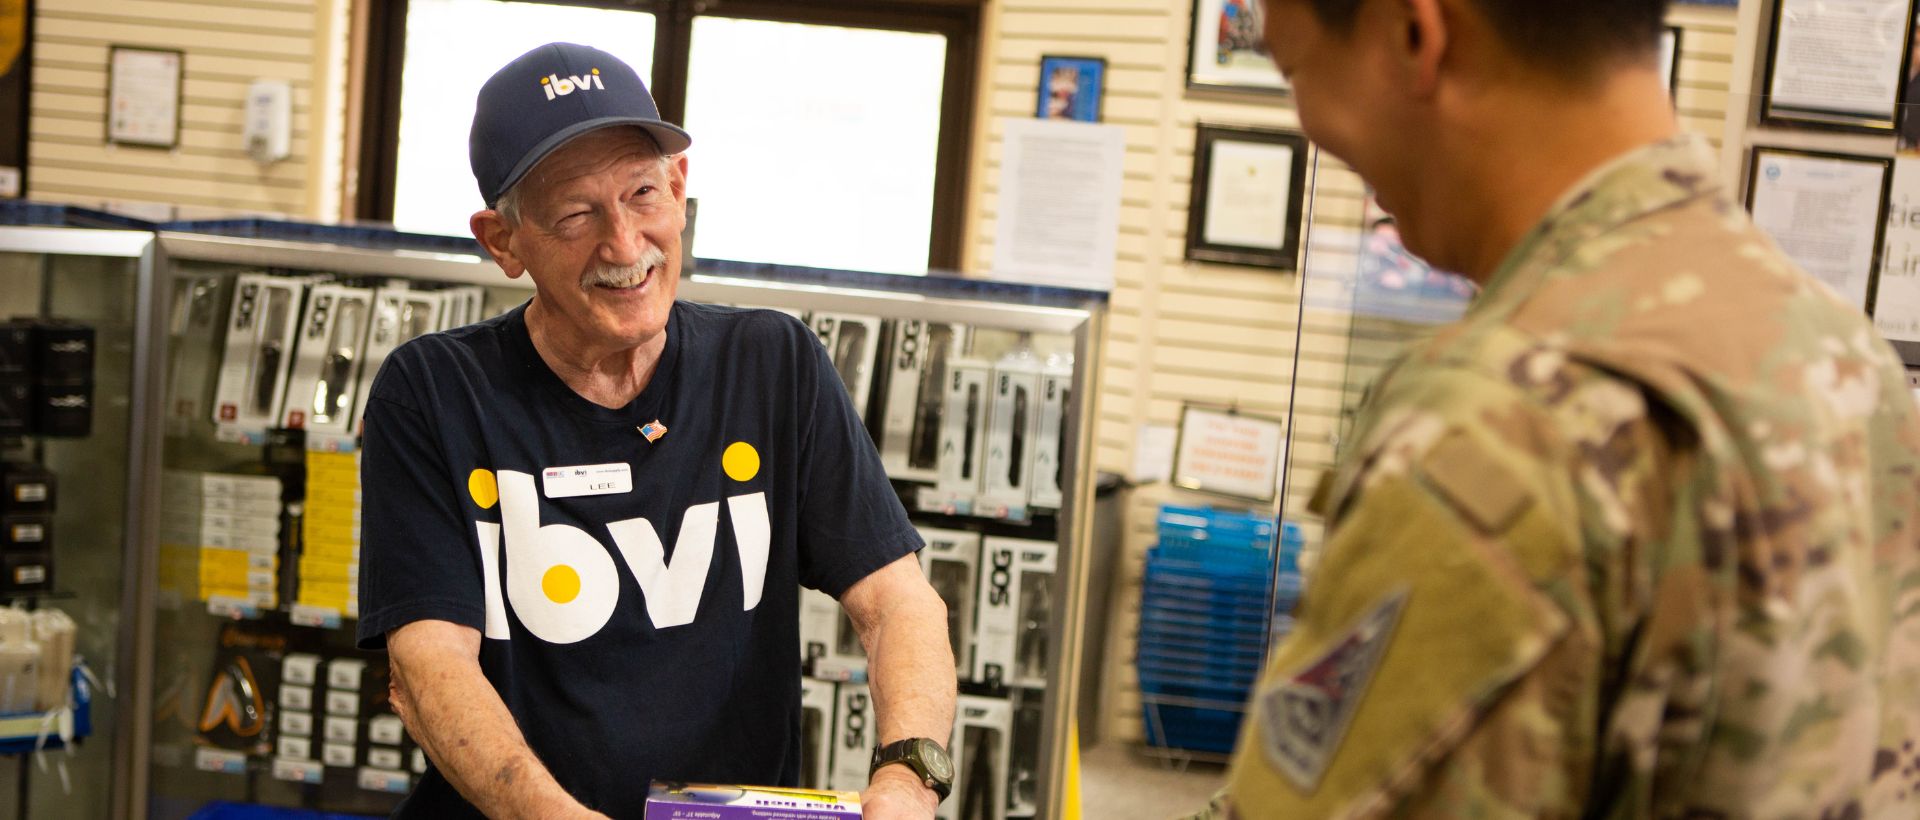 Man in IBVI t-shirt talking with a customer